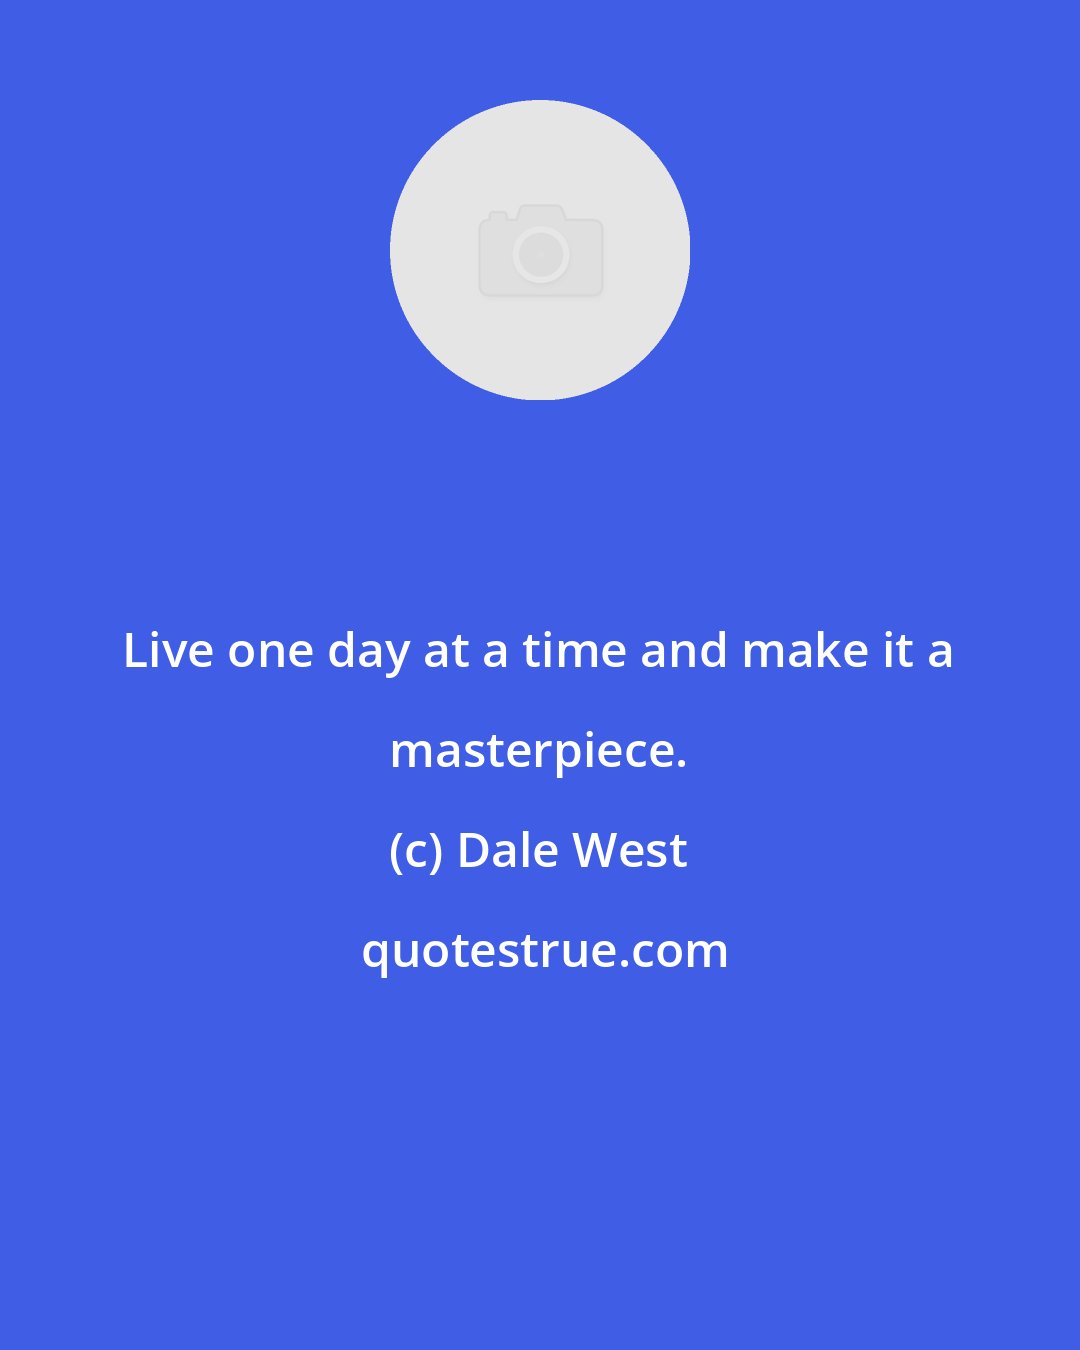 Dale West: Live one day at a time and make it a masterpiece.